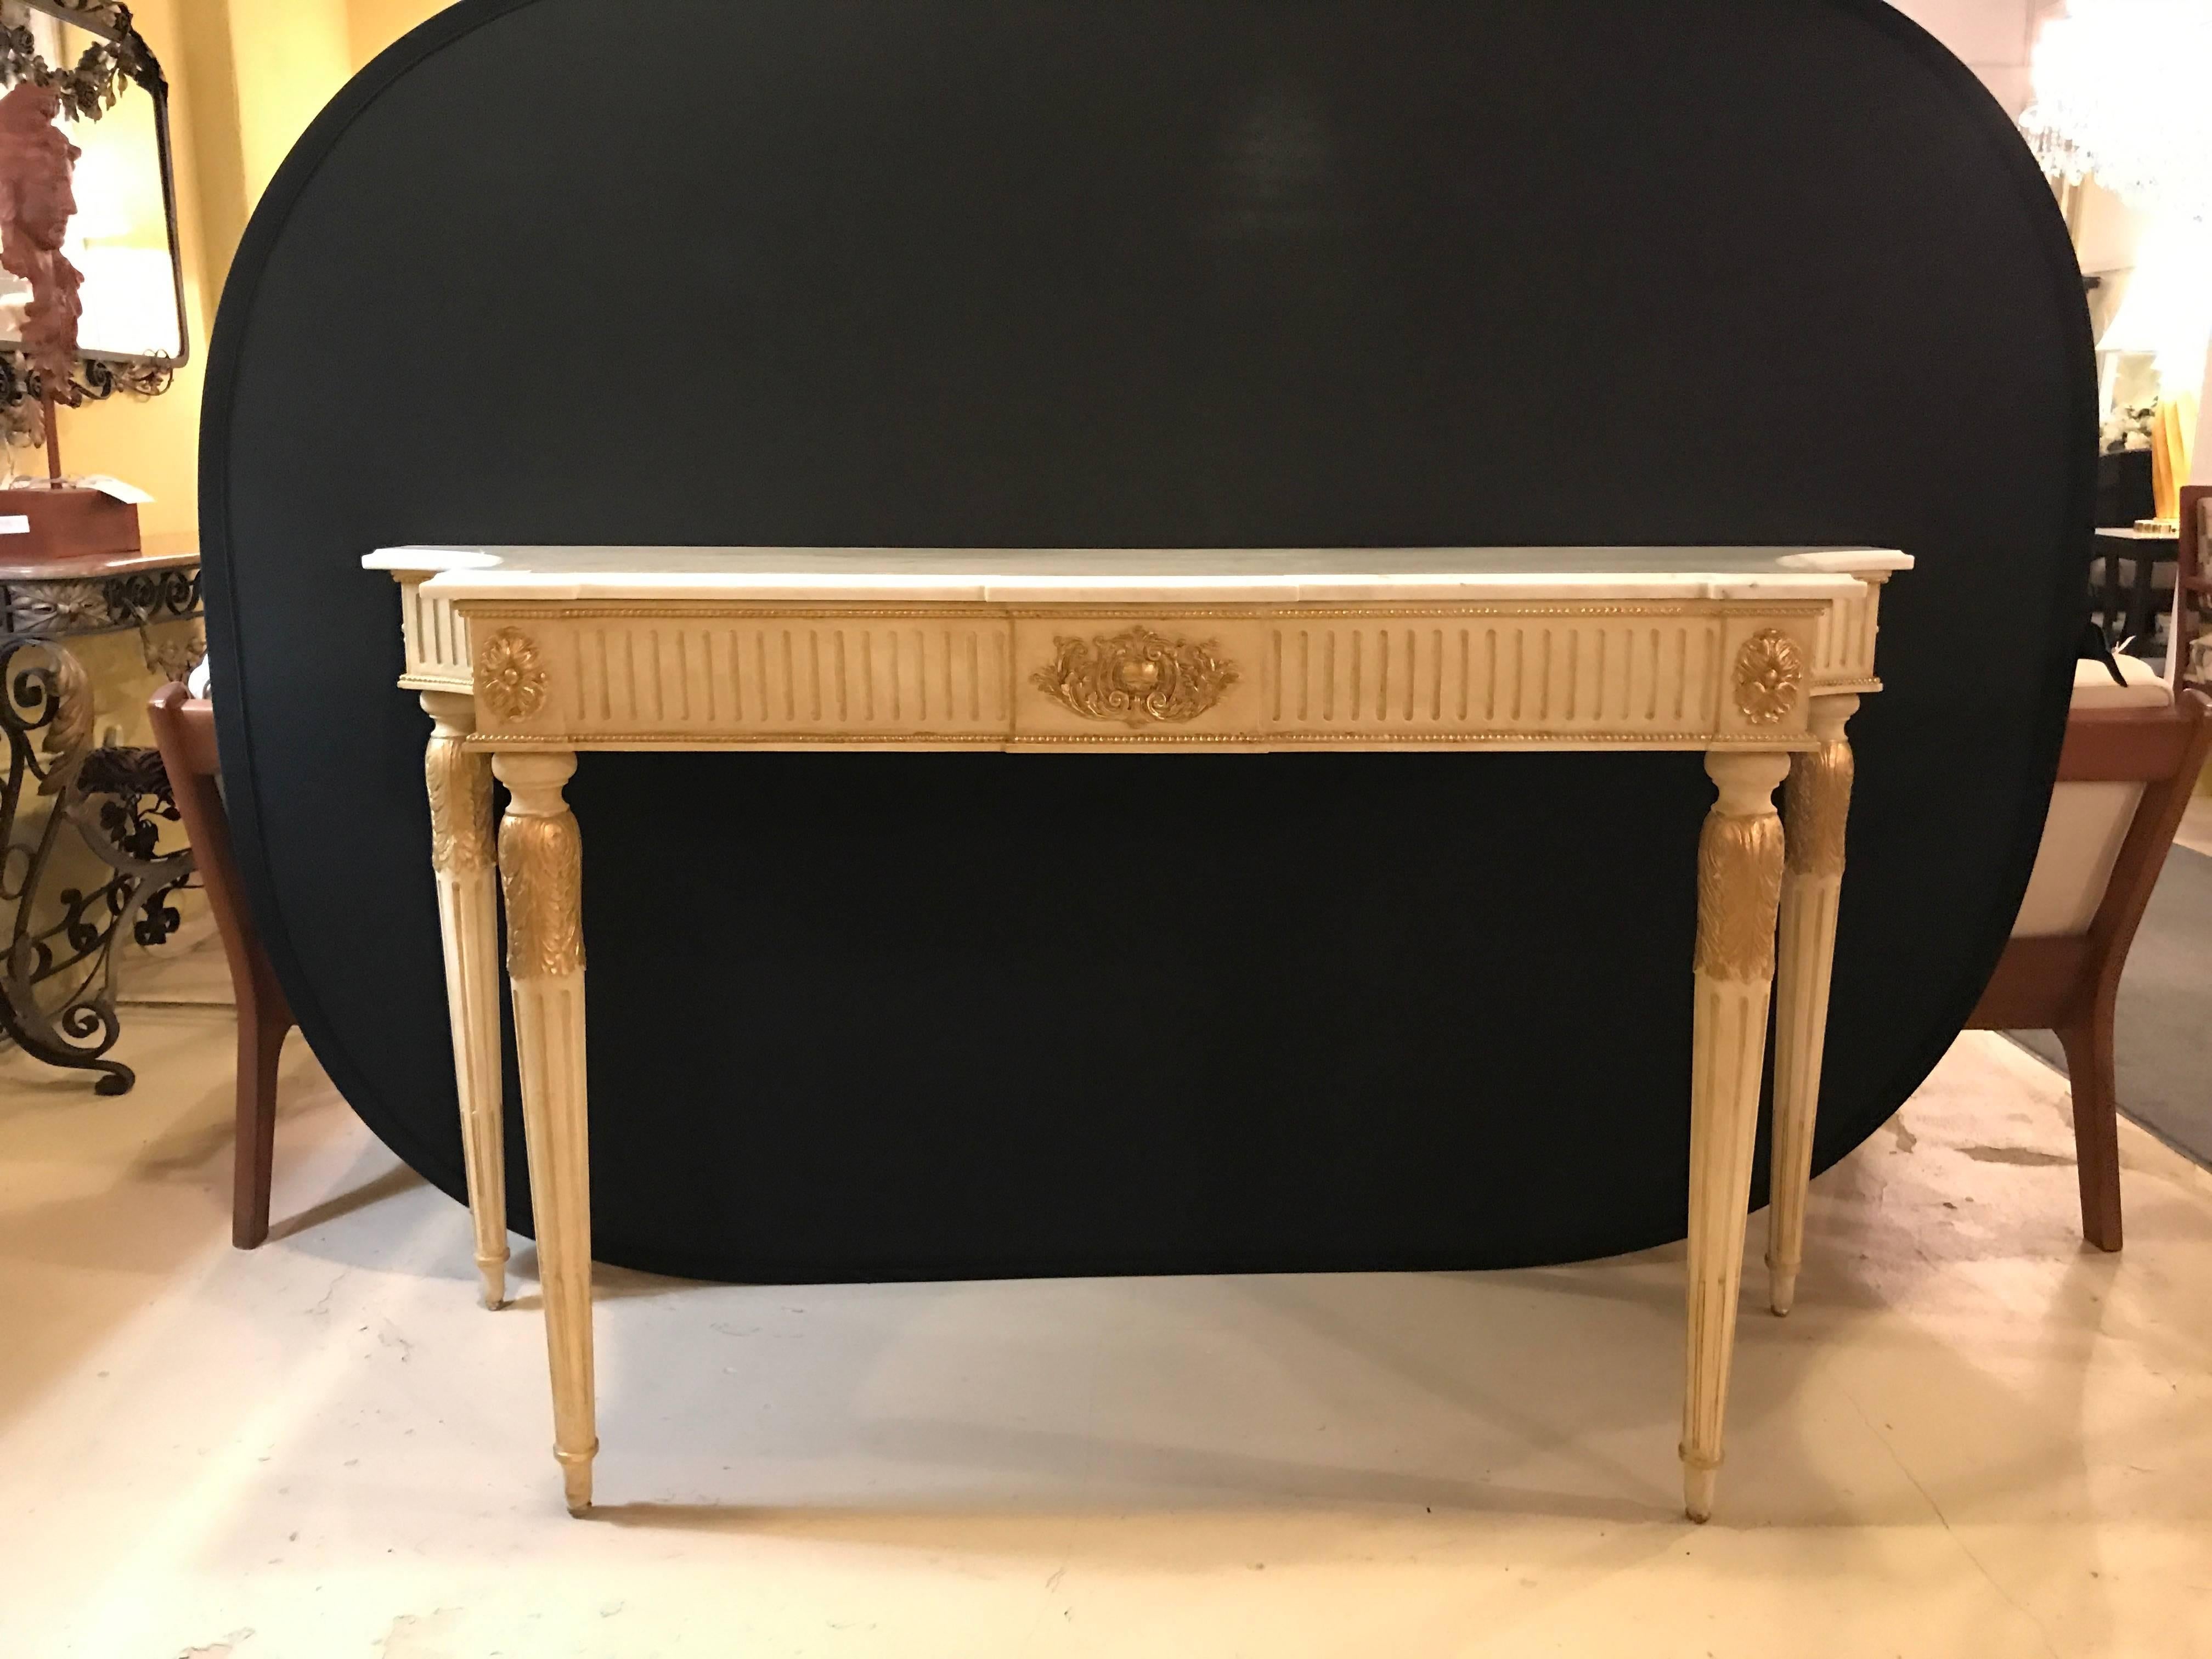 This fine Hollywood Regency style console - sofa table with marble top has been fashioned in the Maison Jansen - Louis XVI style. With inverted curved sides and in a parcel-gilt and paint decorated finish this finely constructed console table is